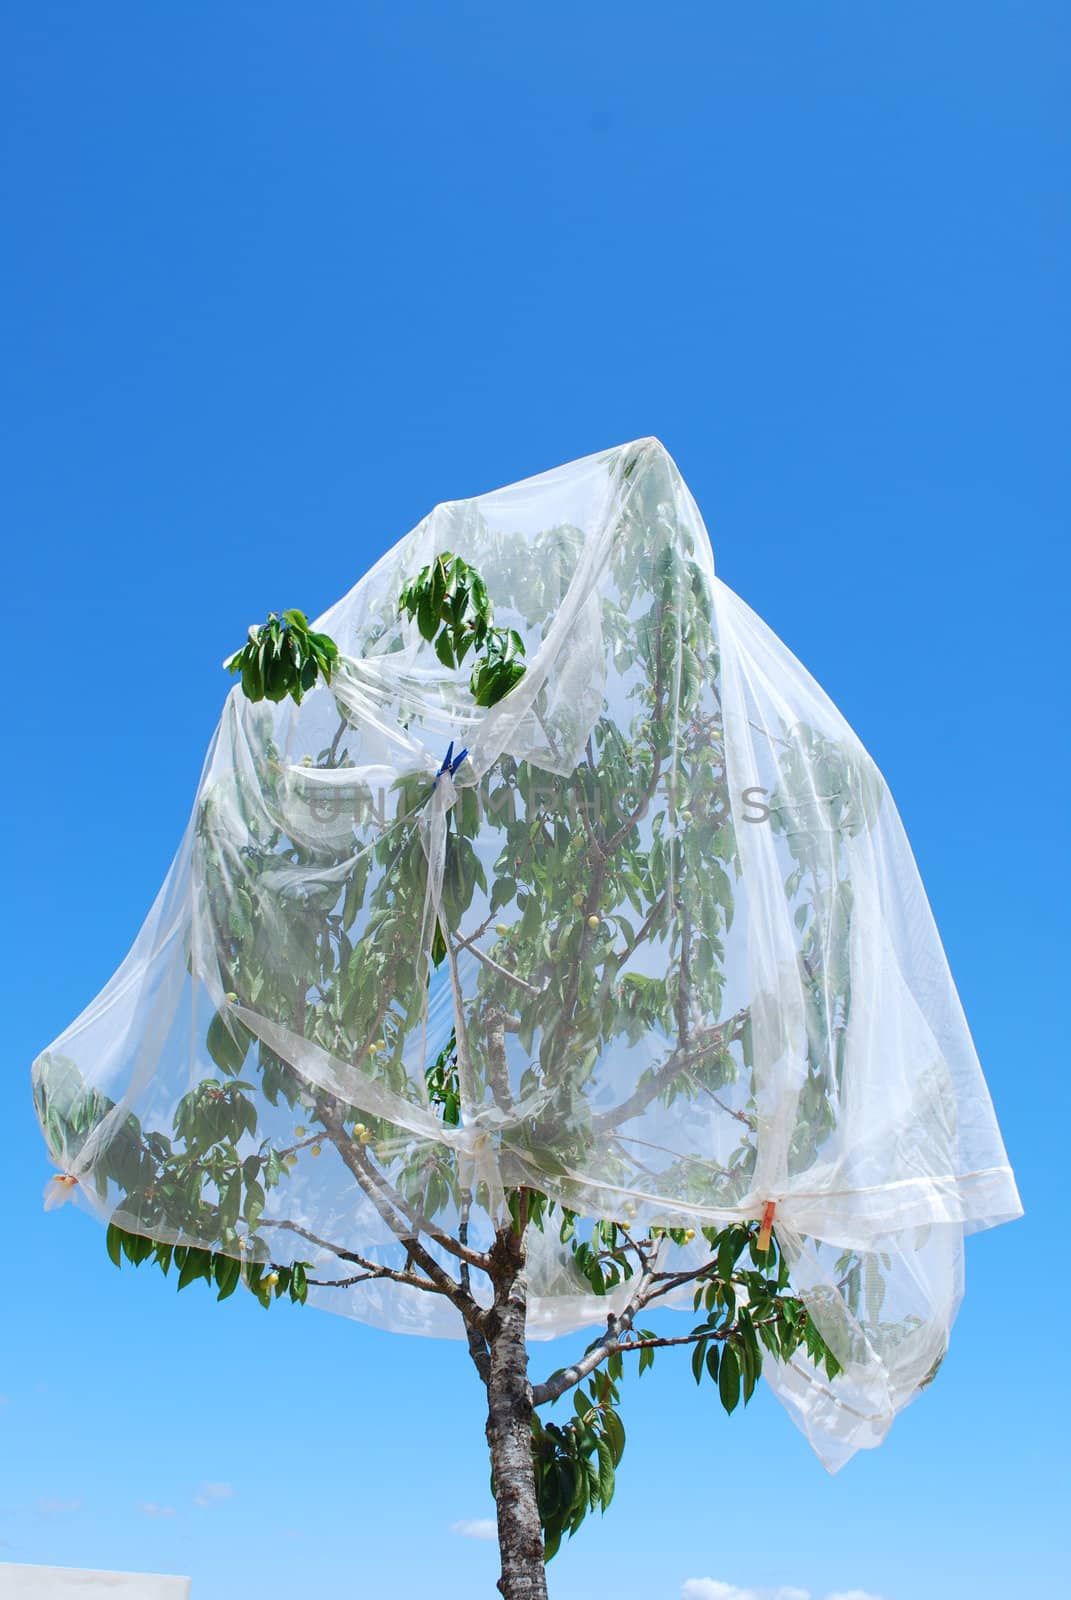 using a white veil to cover/protect cherries from birds